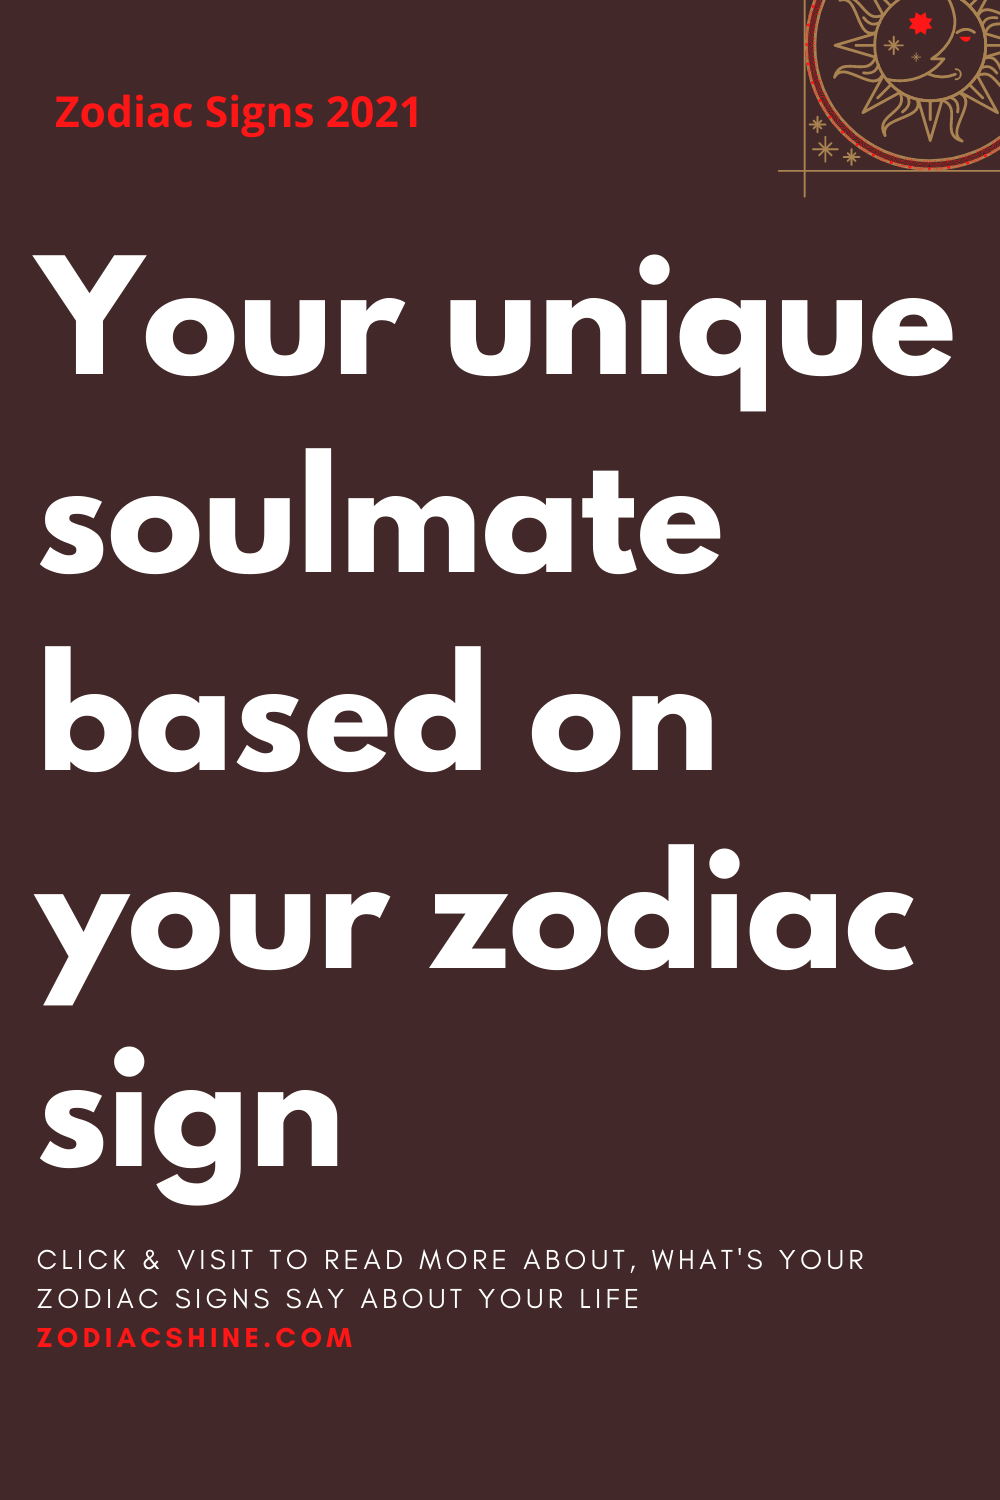 Your unique soulmate based on your zodiac sign